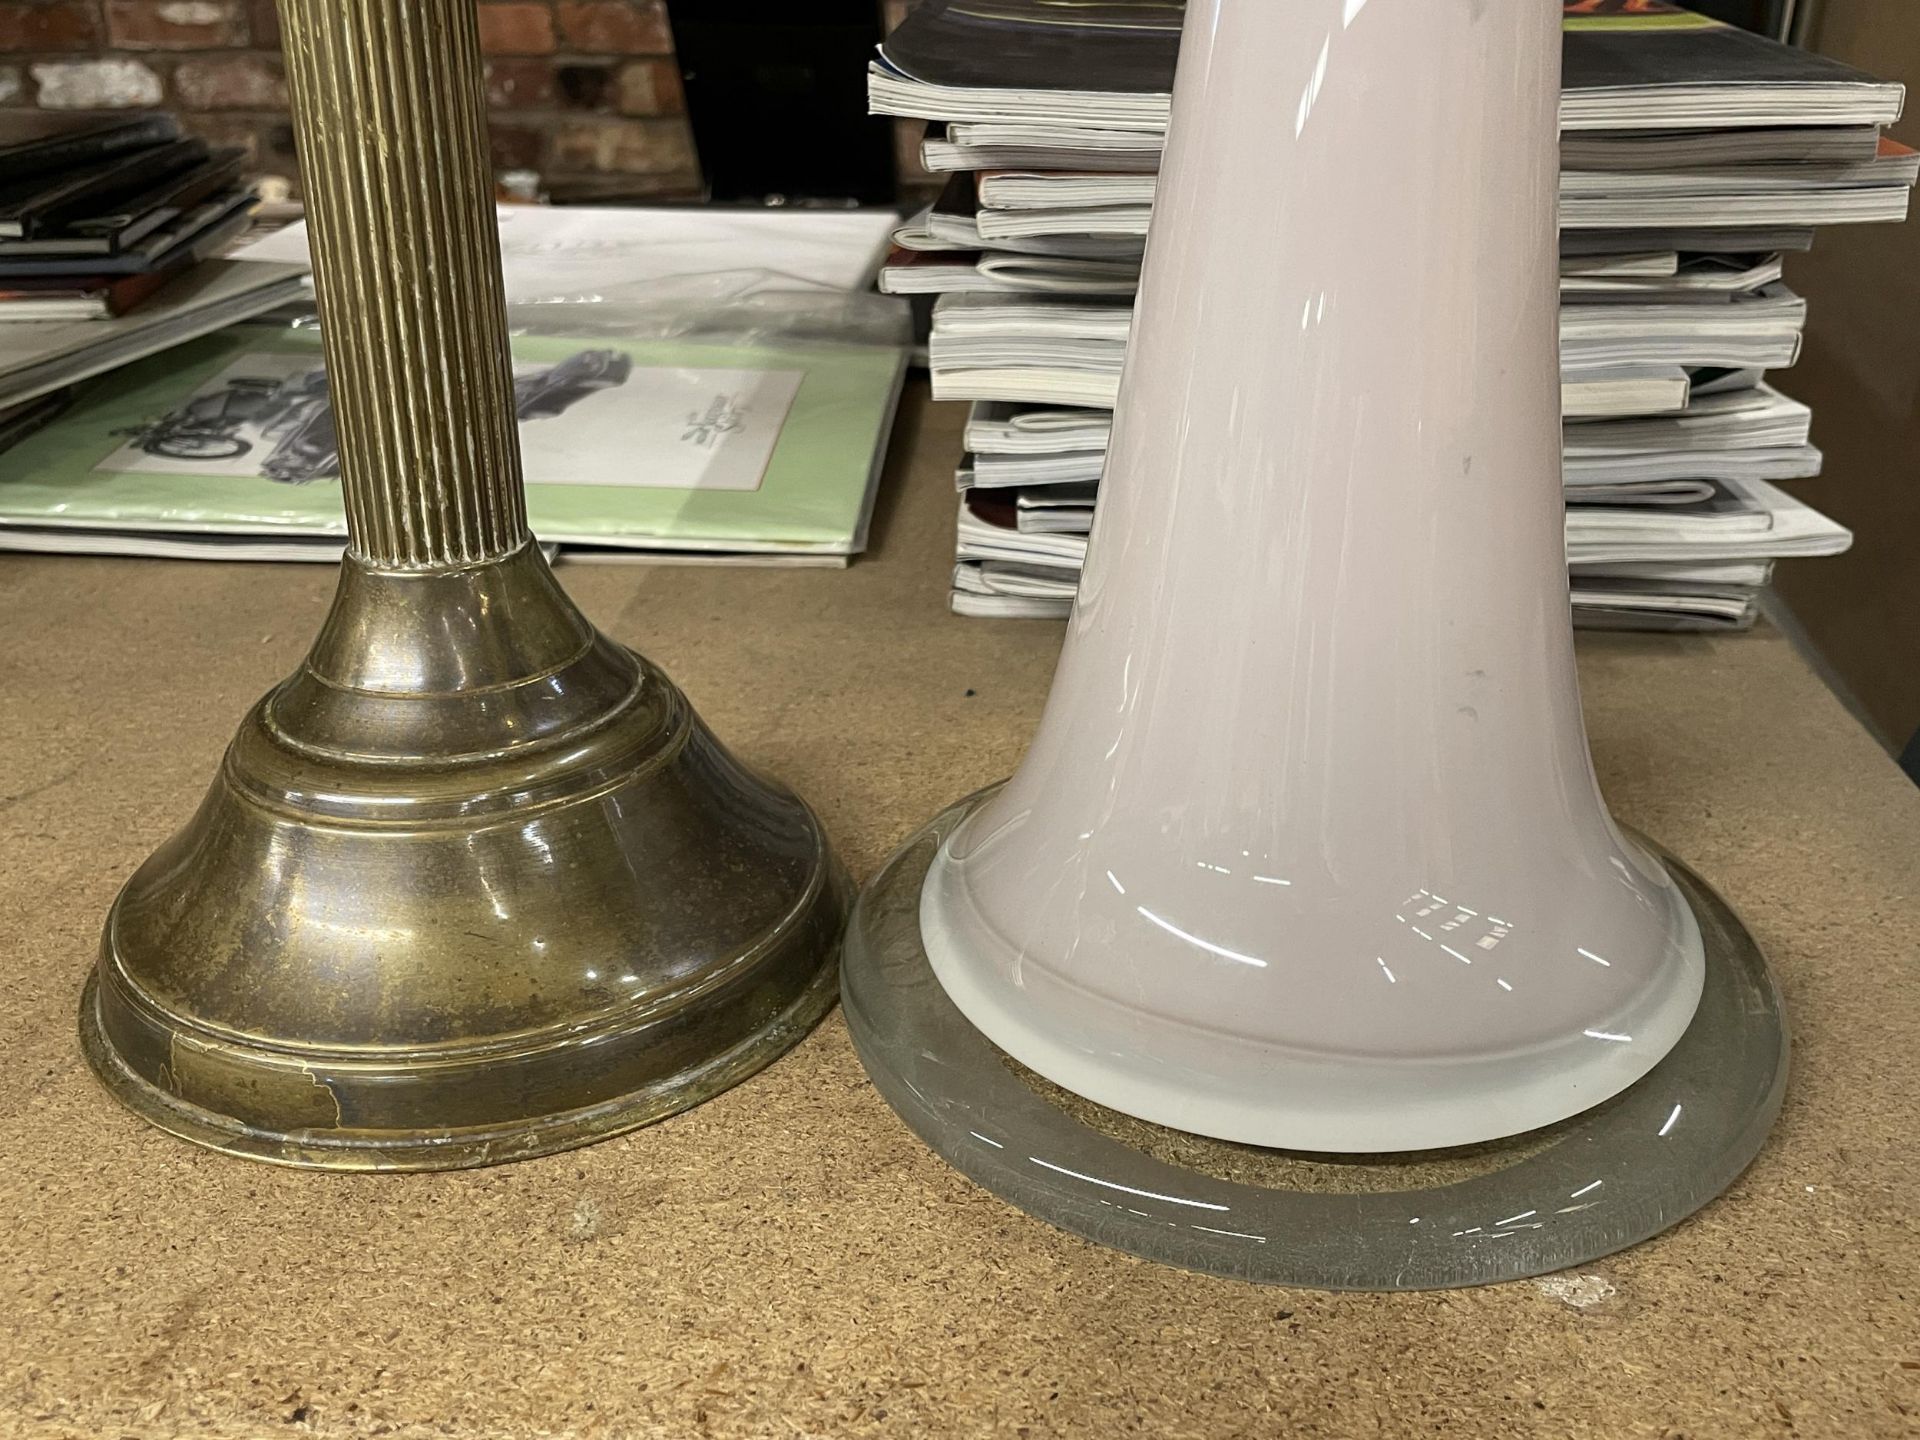 TWO ITEMS - A VINTAGE BRASS COLUMN OIL LAMP AND TALL GLASS VASE - Image 4 of 4